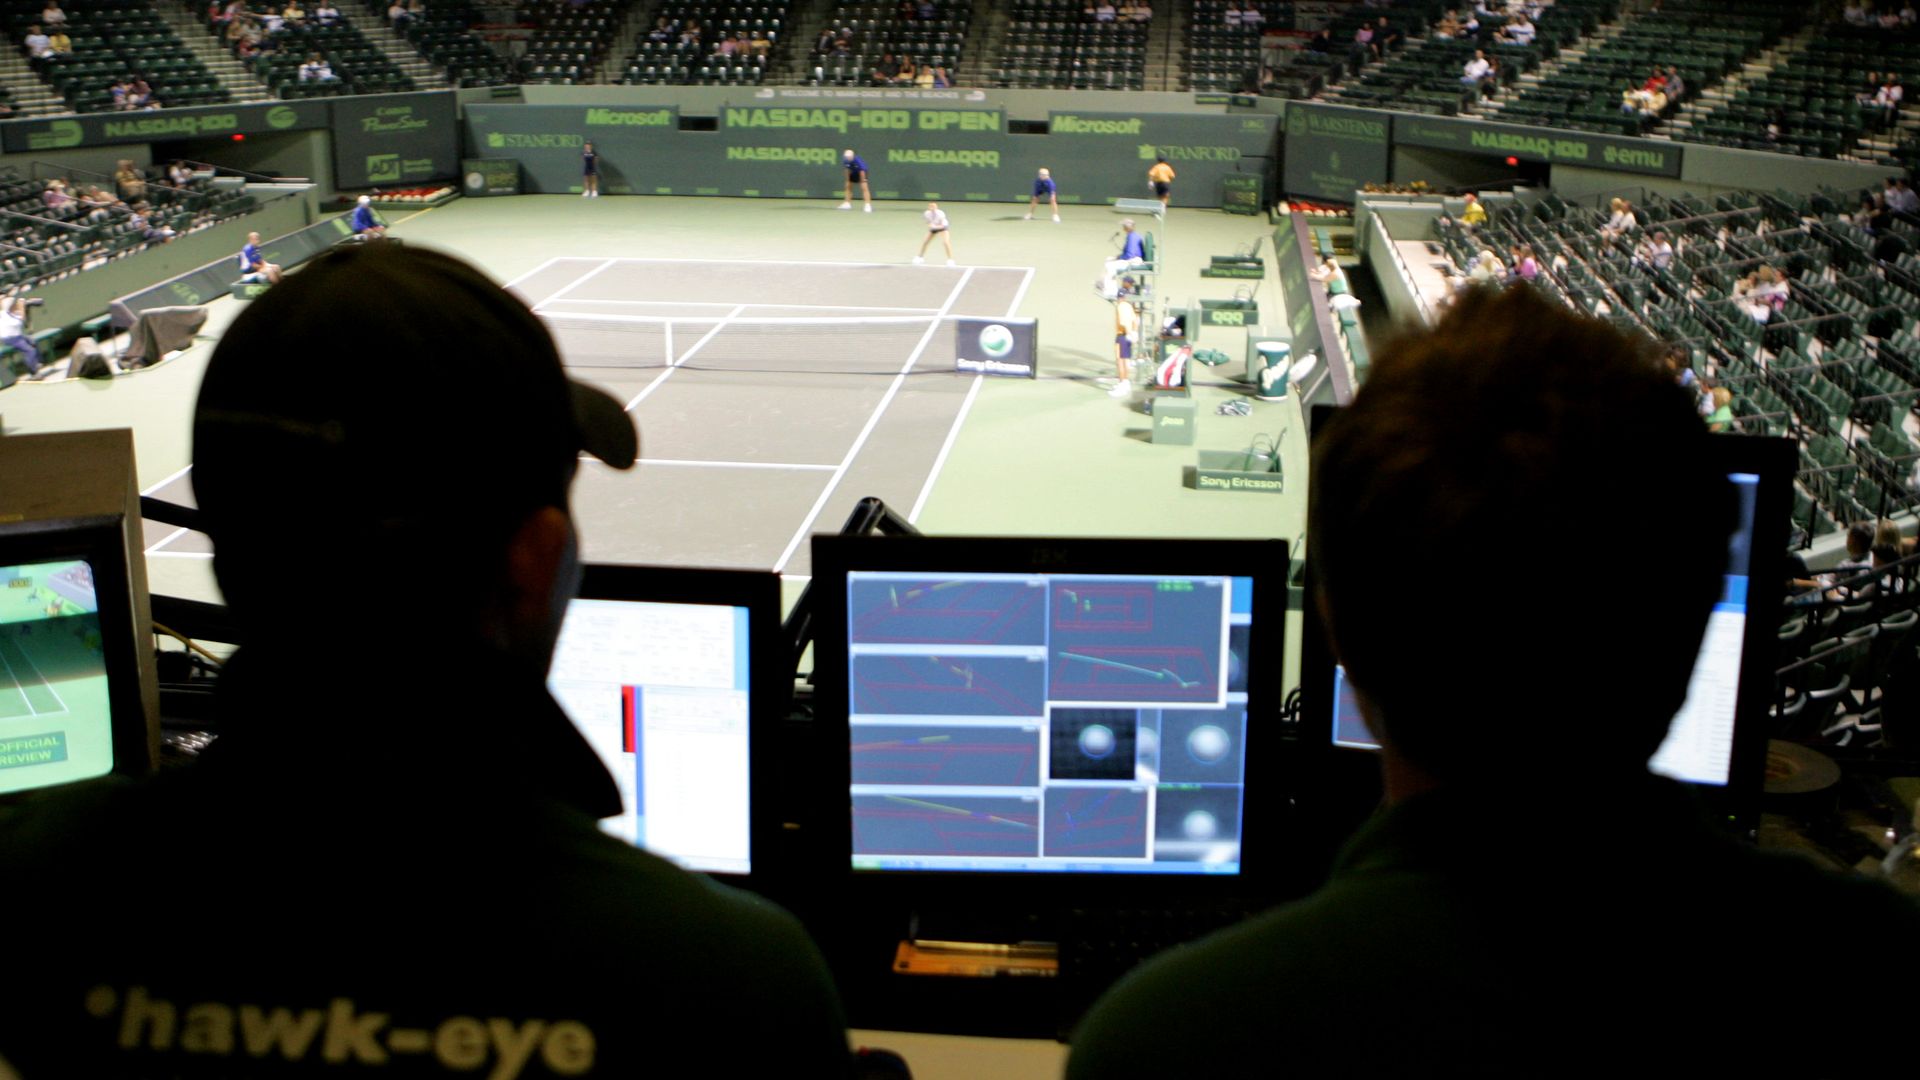 Automatic line-calling technology to replace line judges on ATP Tour